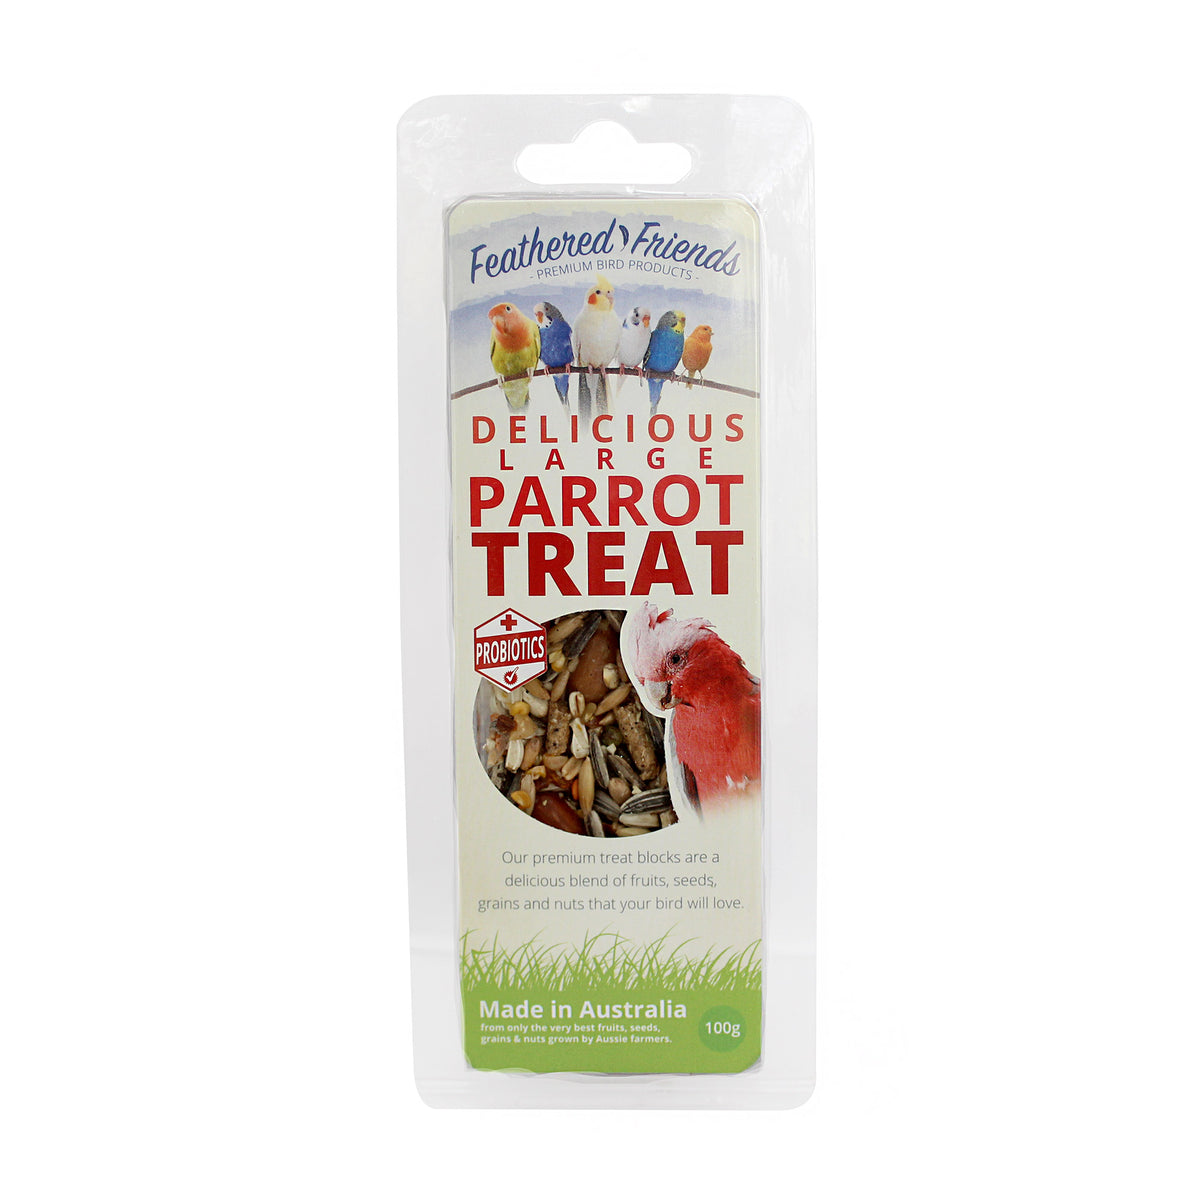 Feathered Friends Delicious Large Parrot Treat 100g